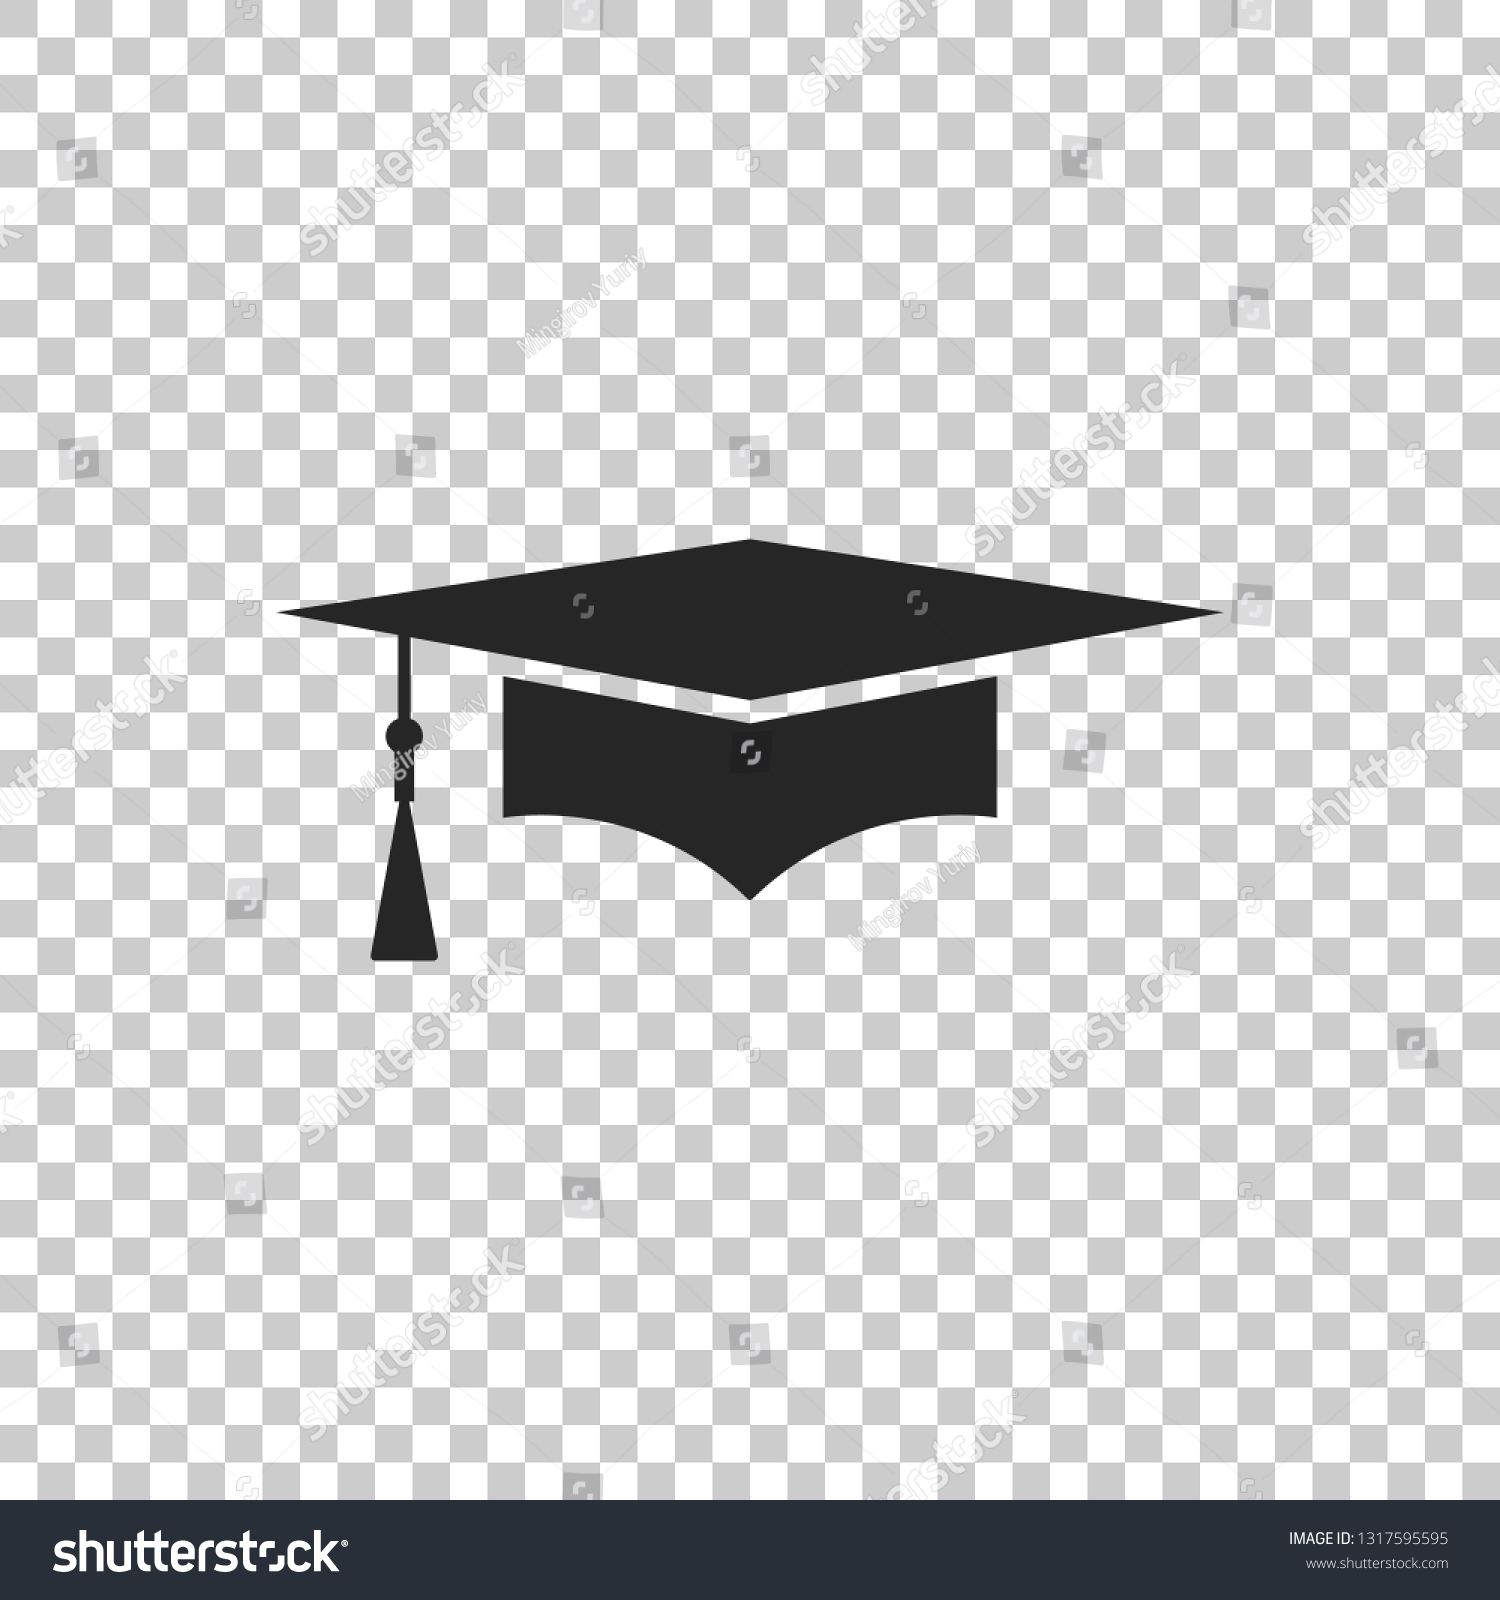 Graduation Cap Icon Isolated On Transparent Stock Vector (Royalty Free